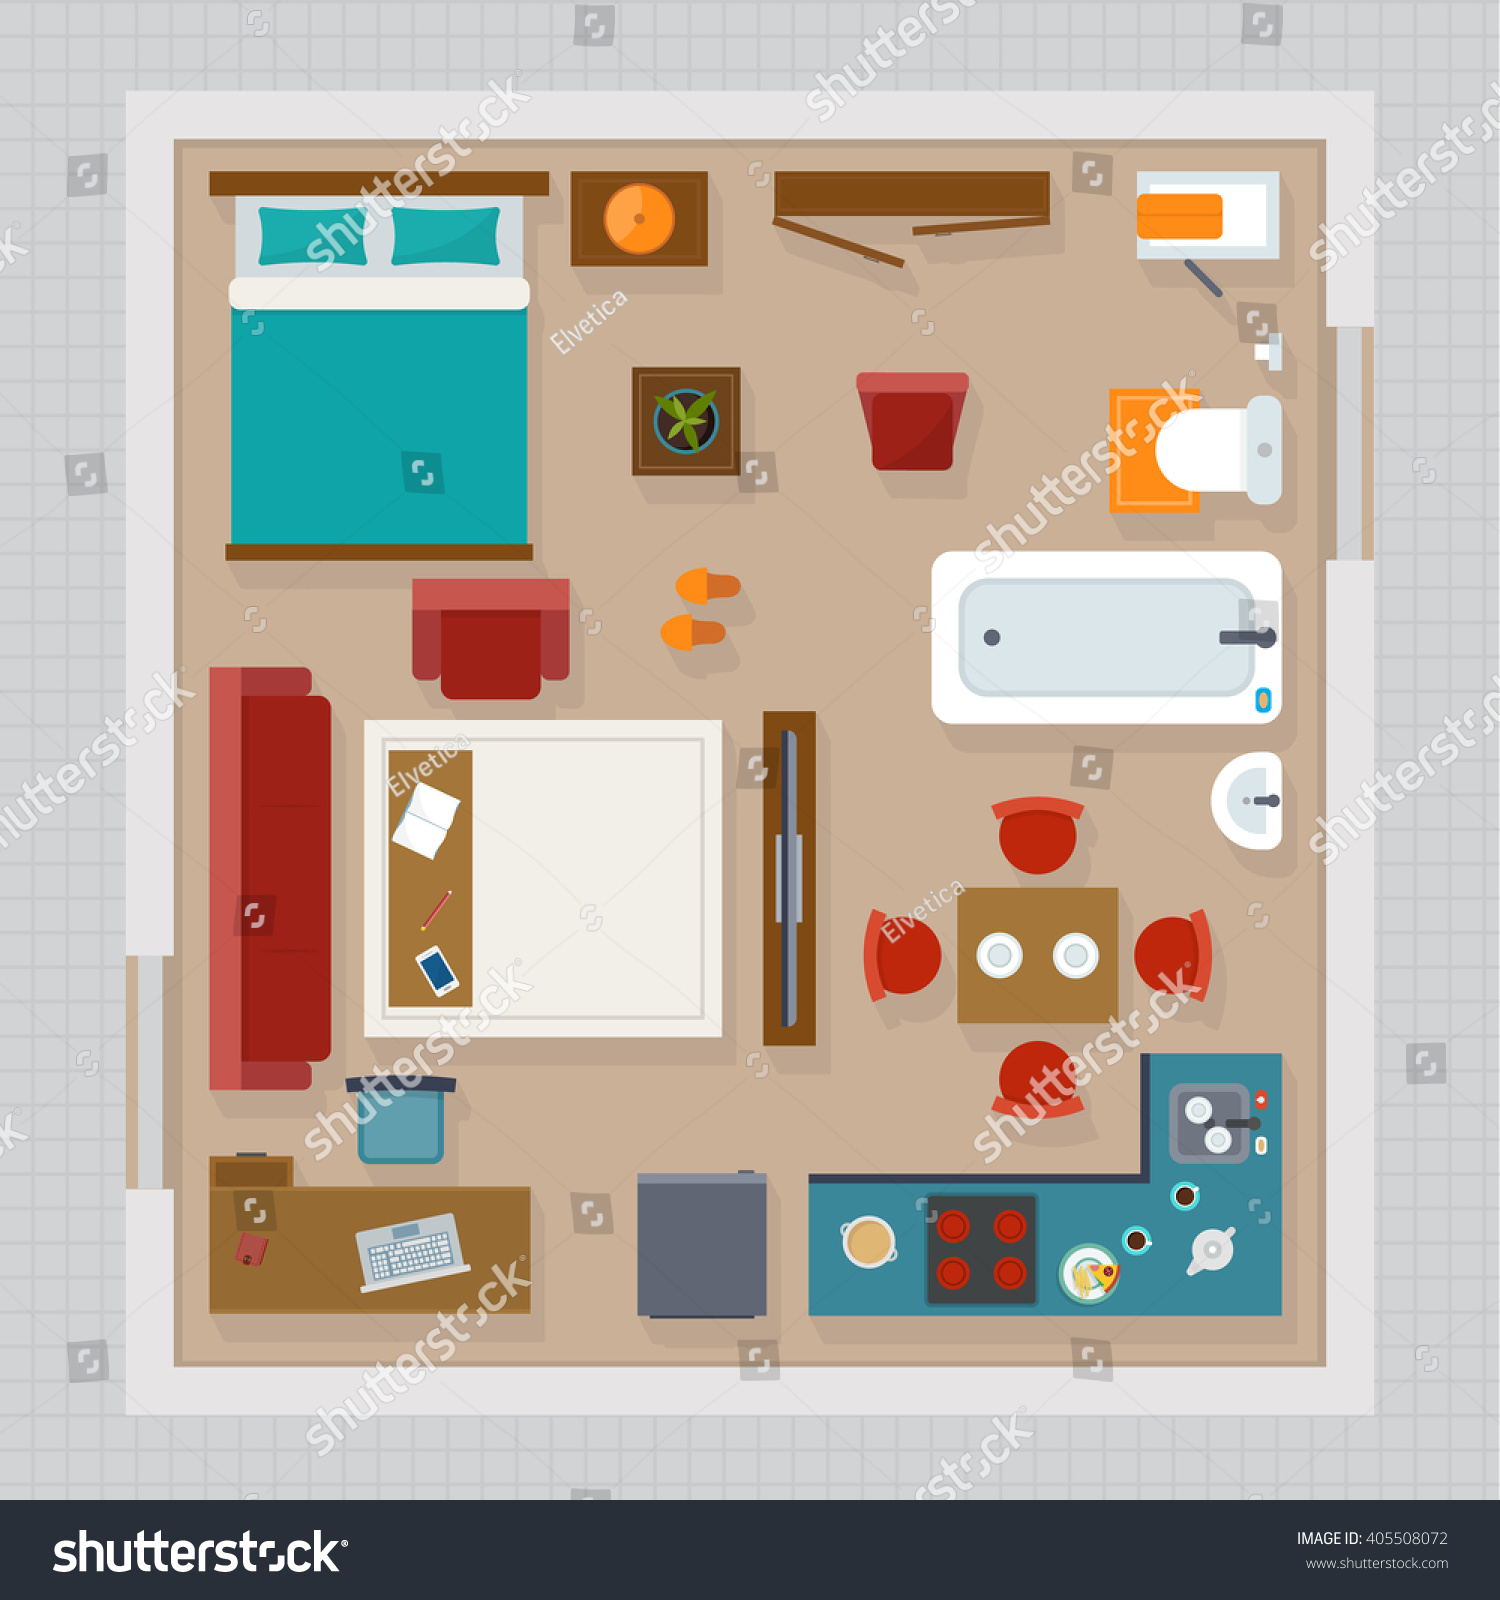 room planning clipart - photo #18